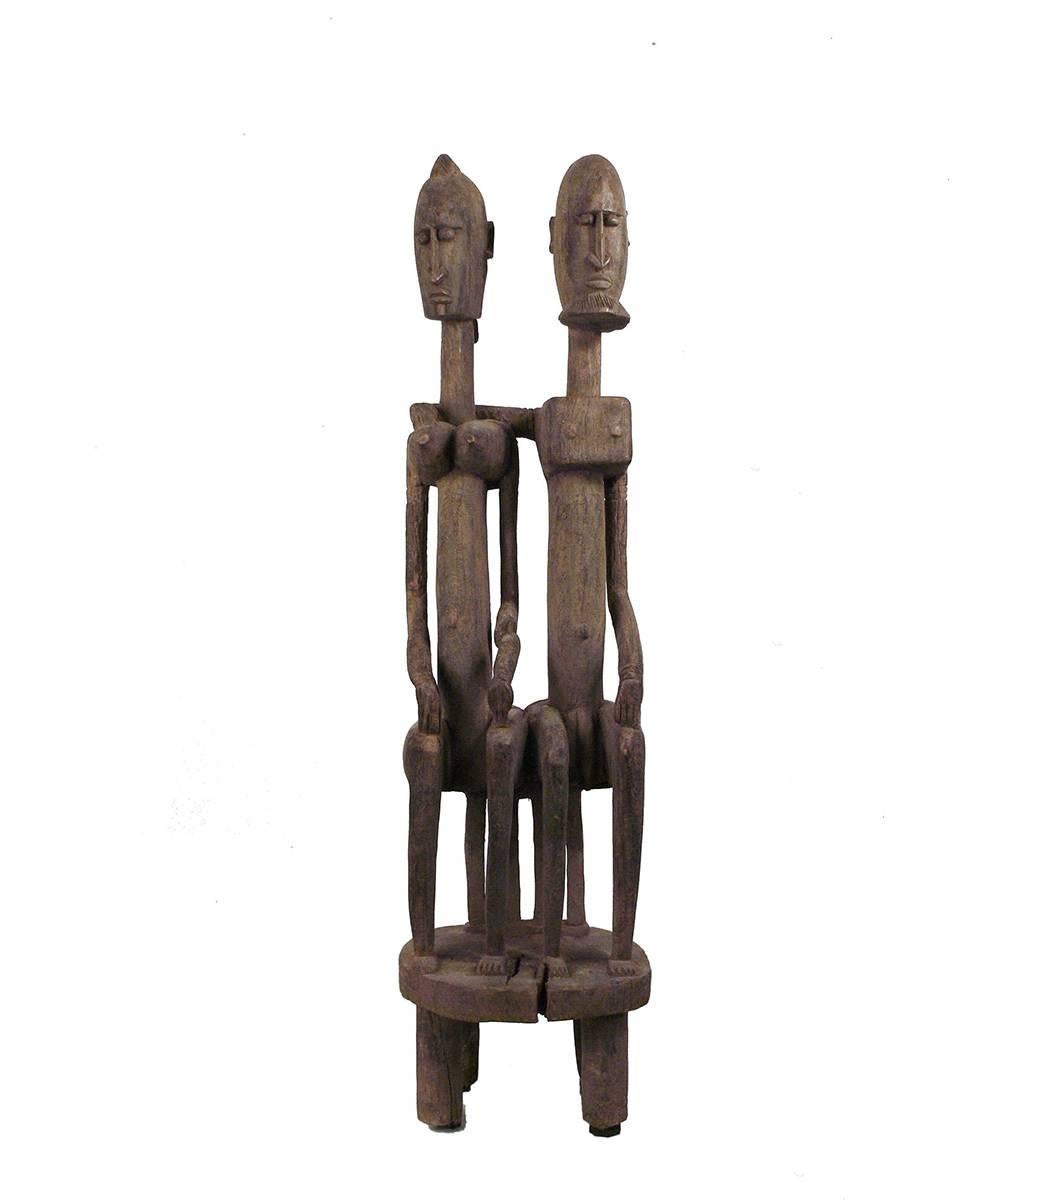 This wonderful old wooden figure represents the role of each sex in the Dogon patriarchal society. It was probably placed on a shrine. Beautiful timeworn patina; old little break on the woman's left arm. The man gesture, putting his arm around the